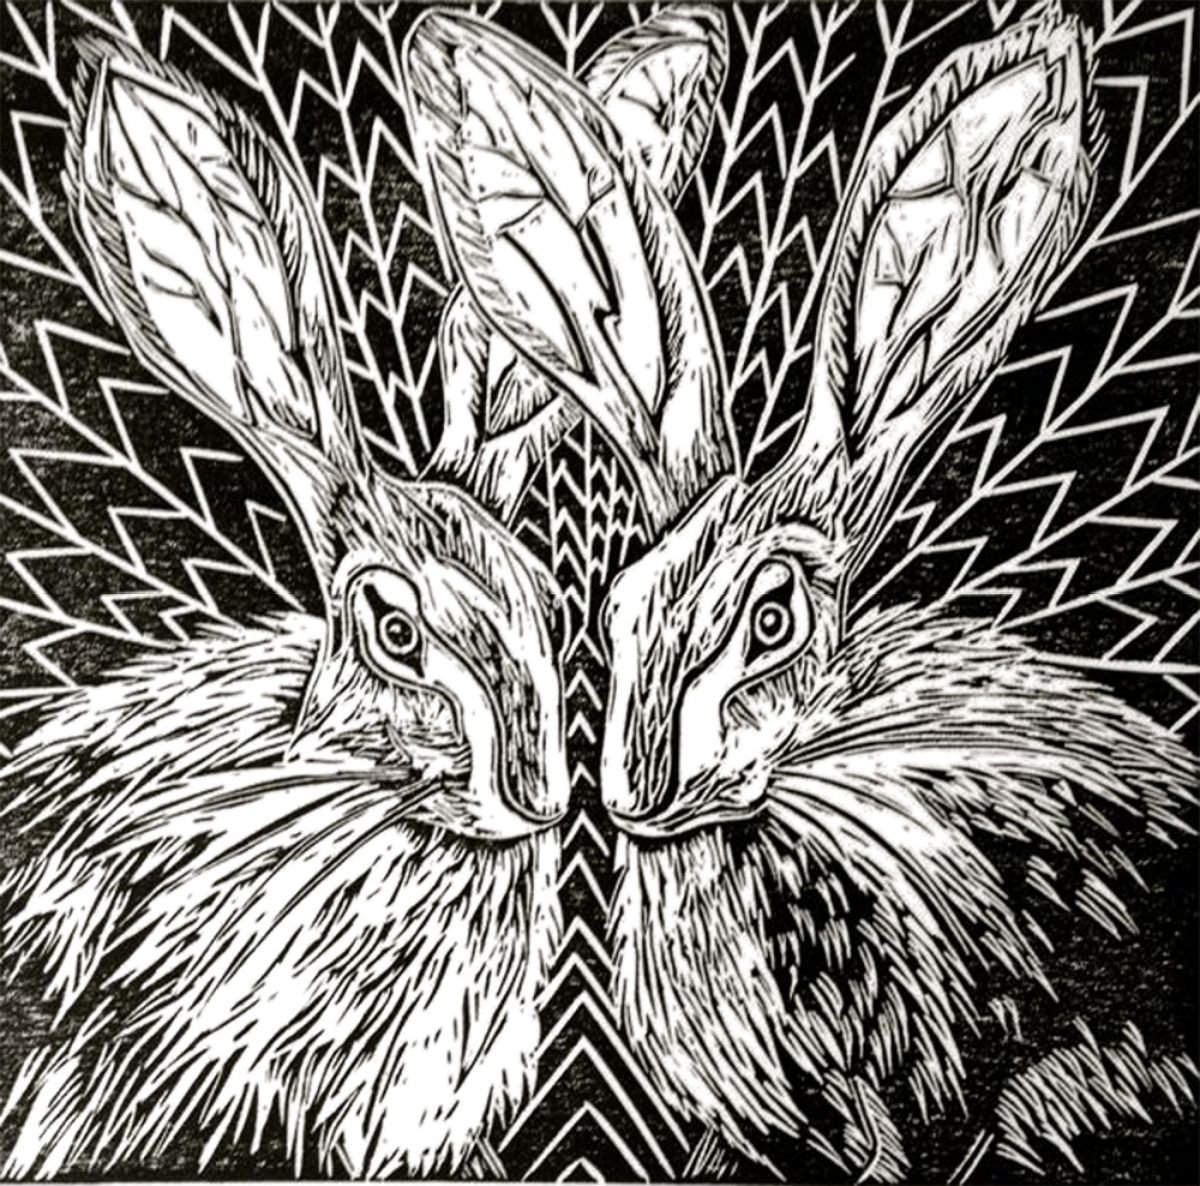 March Hares by Cally Conway